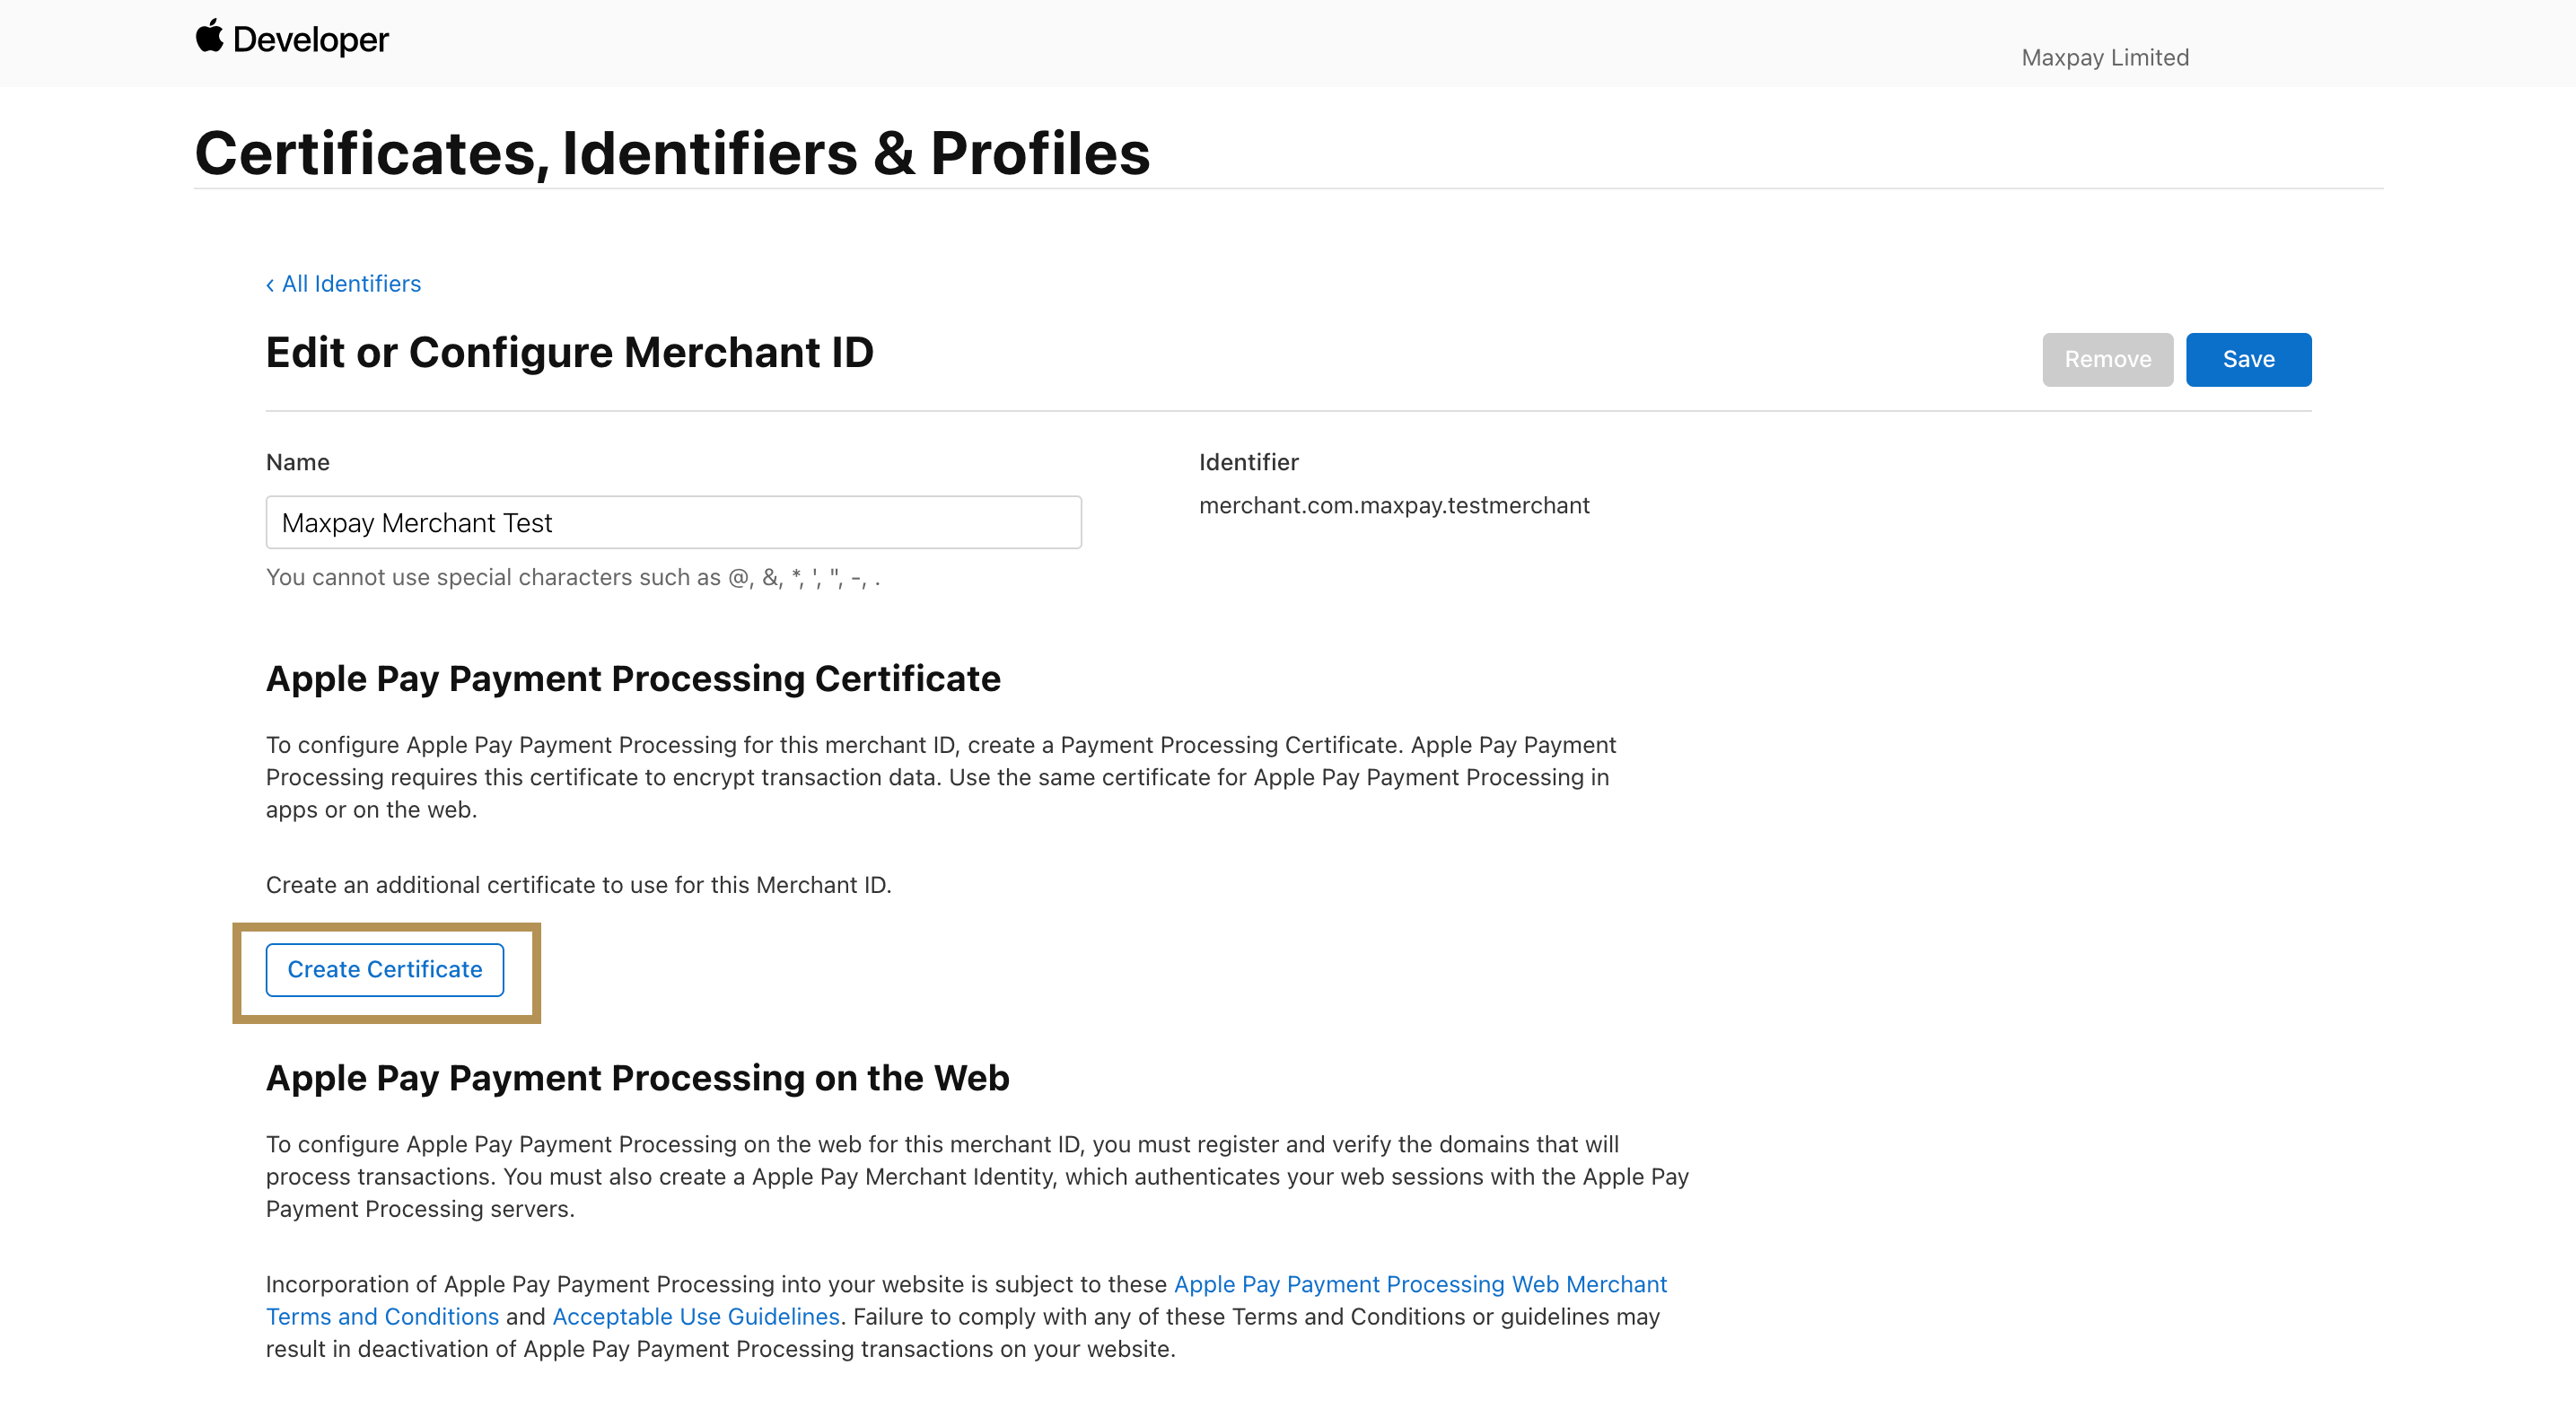 Generating a Payments Processing Certificate